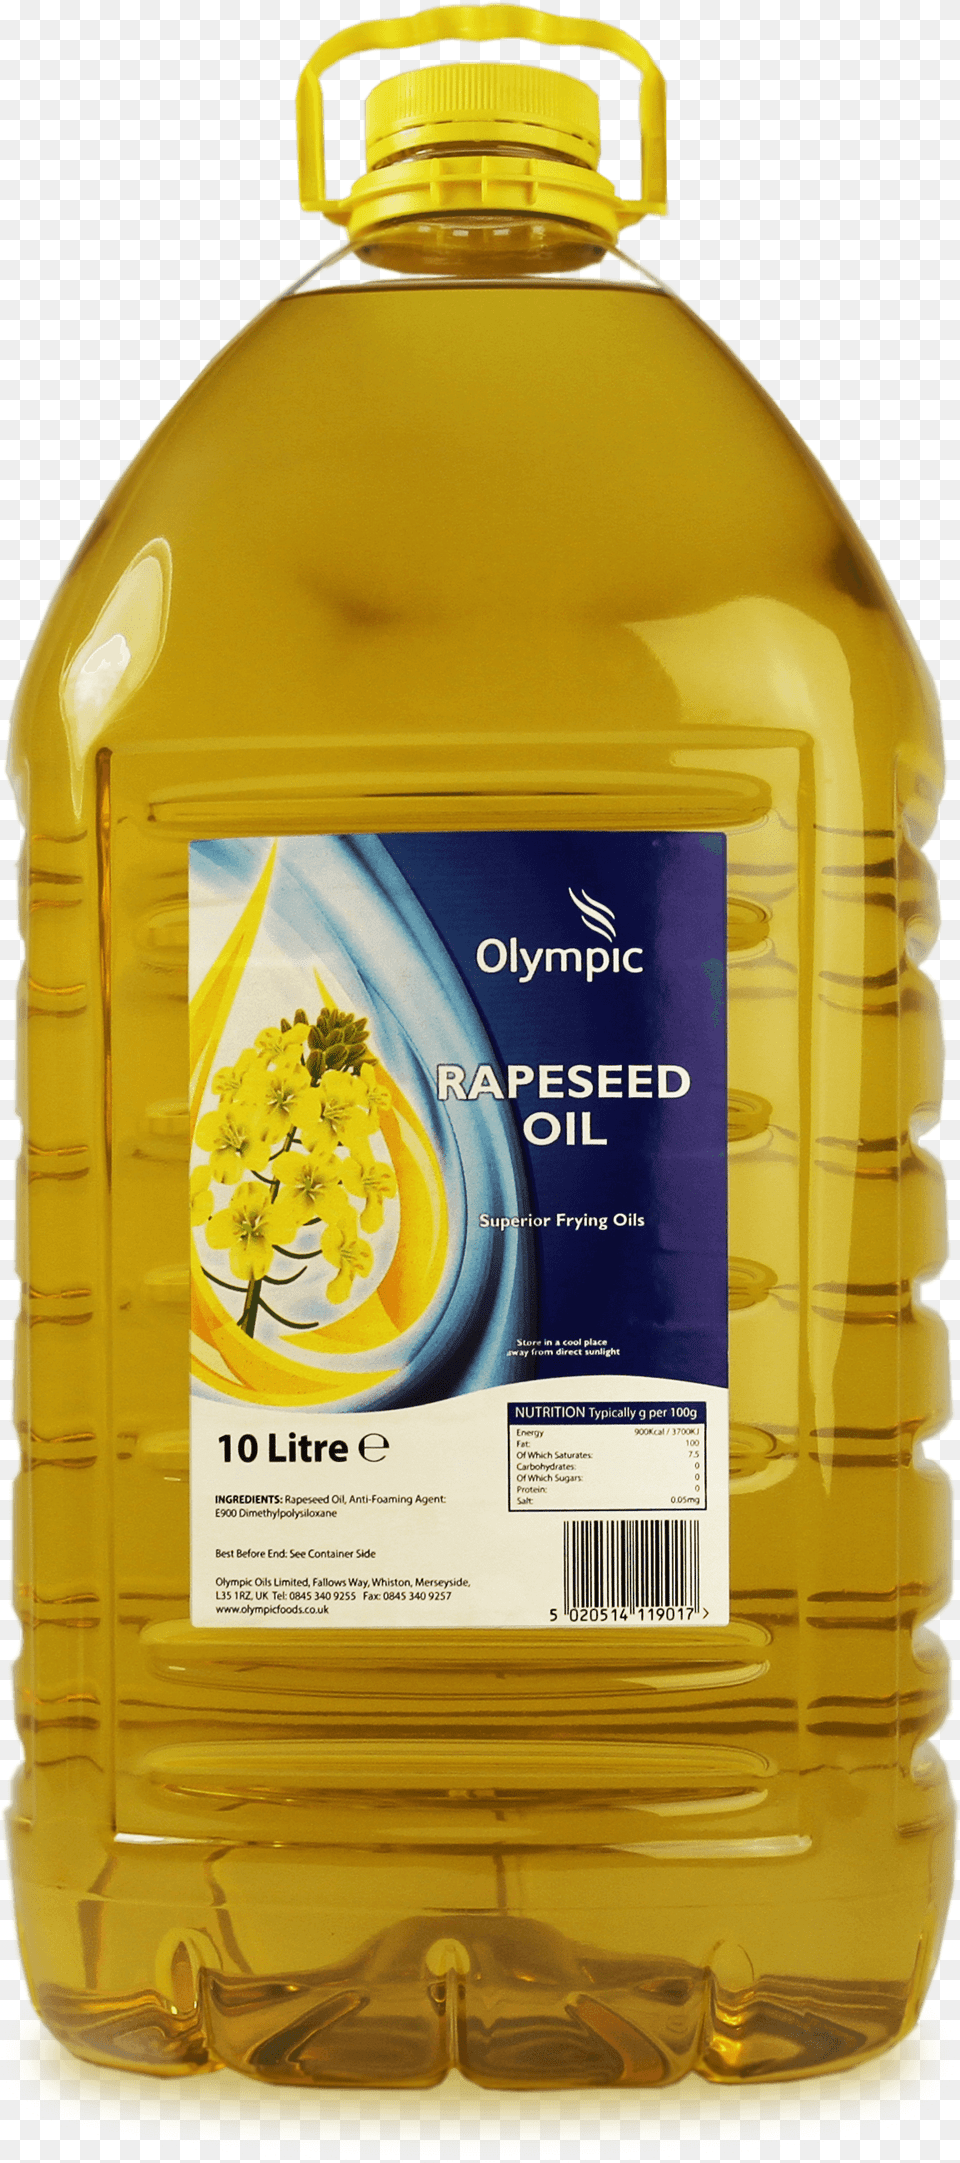 Olympic Rapeseed Oil Bottle In Box Olympic Oil, Cooking Oil, Food Png